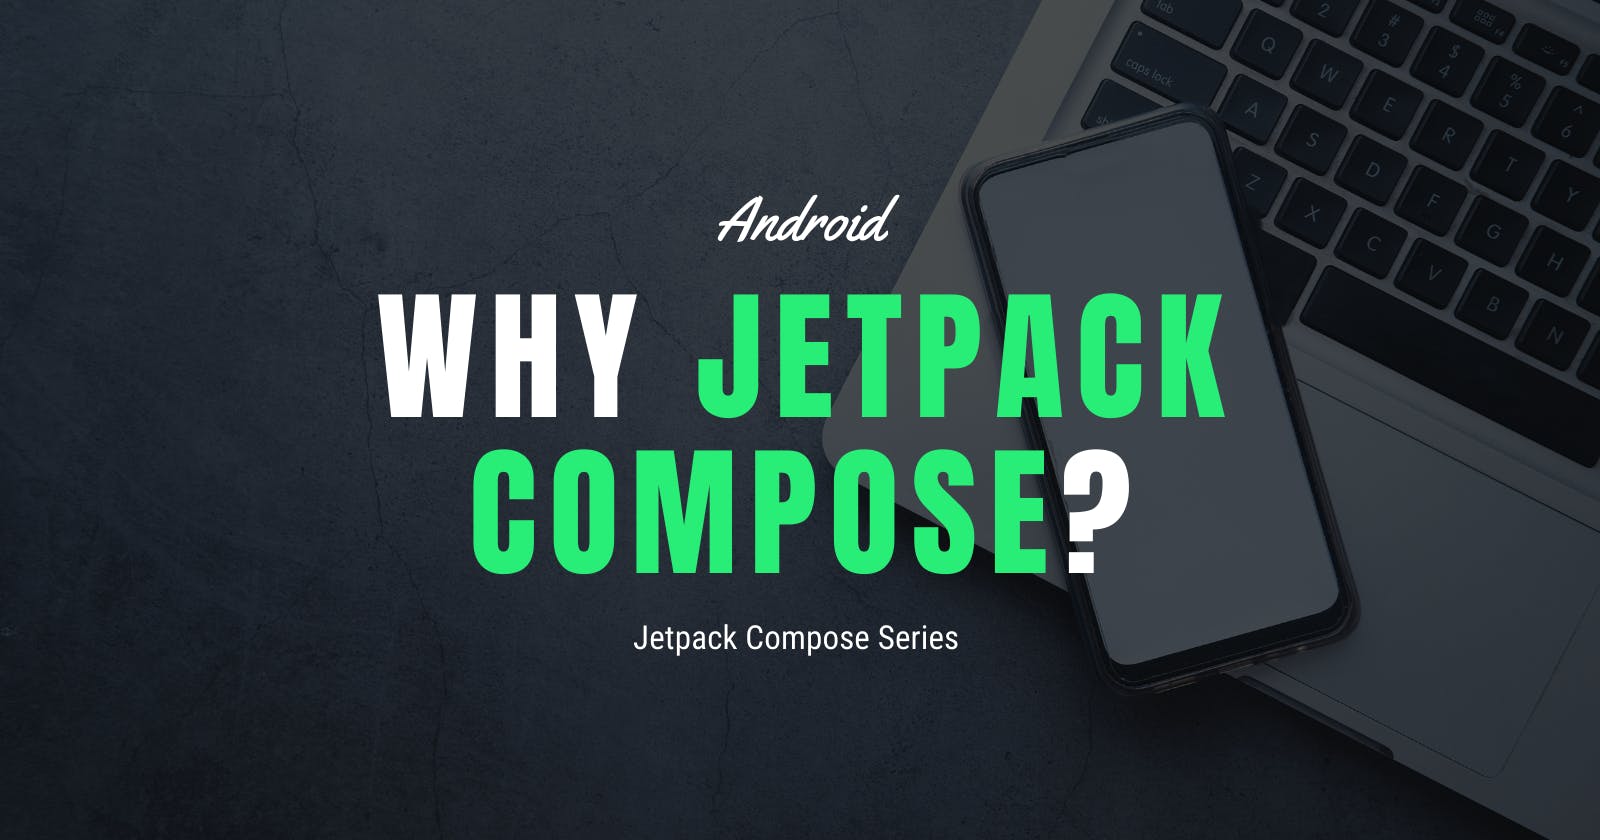 Why Jetpack Compose?